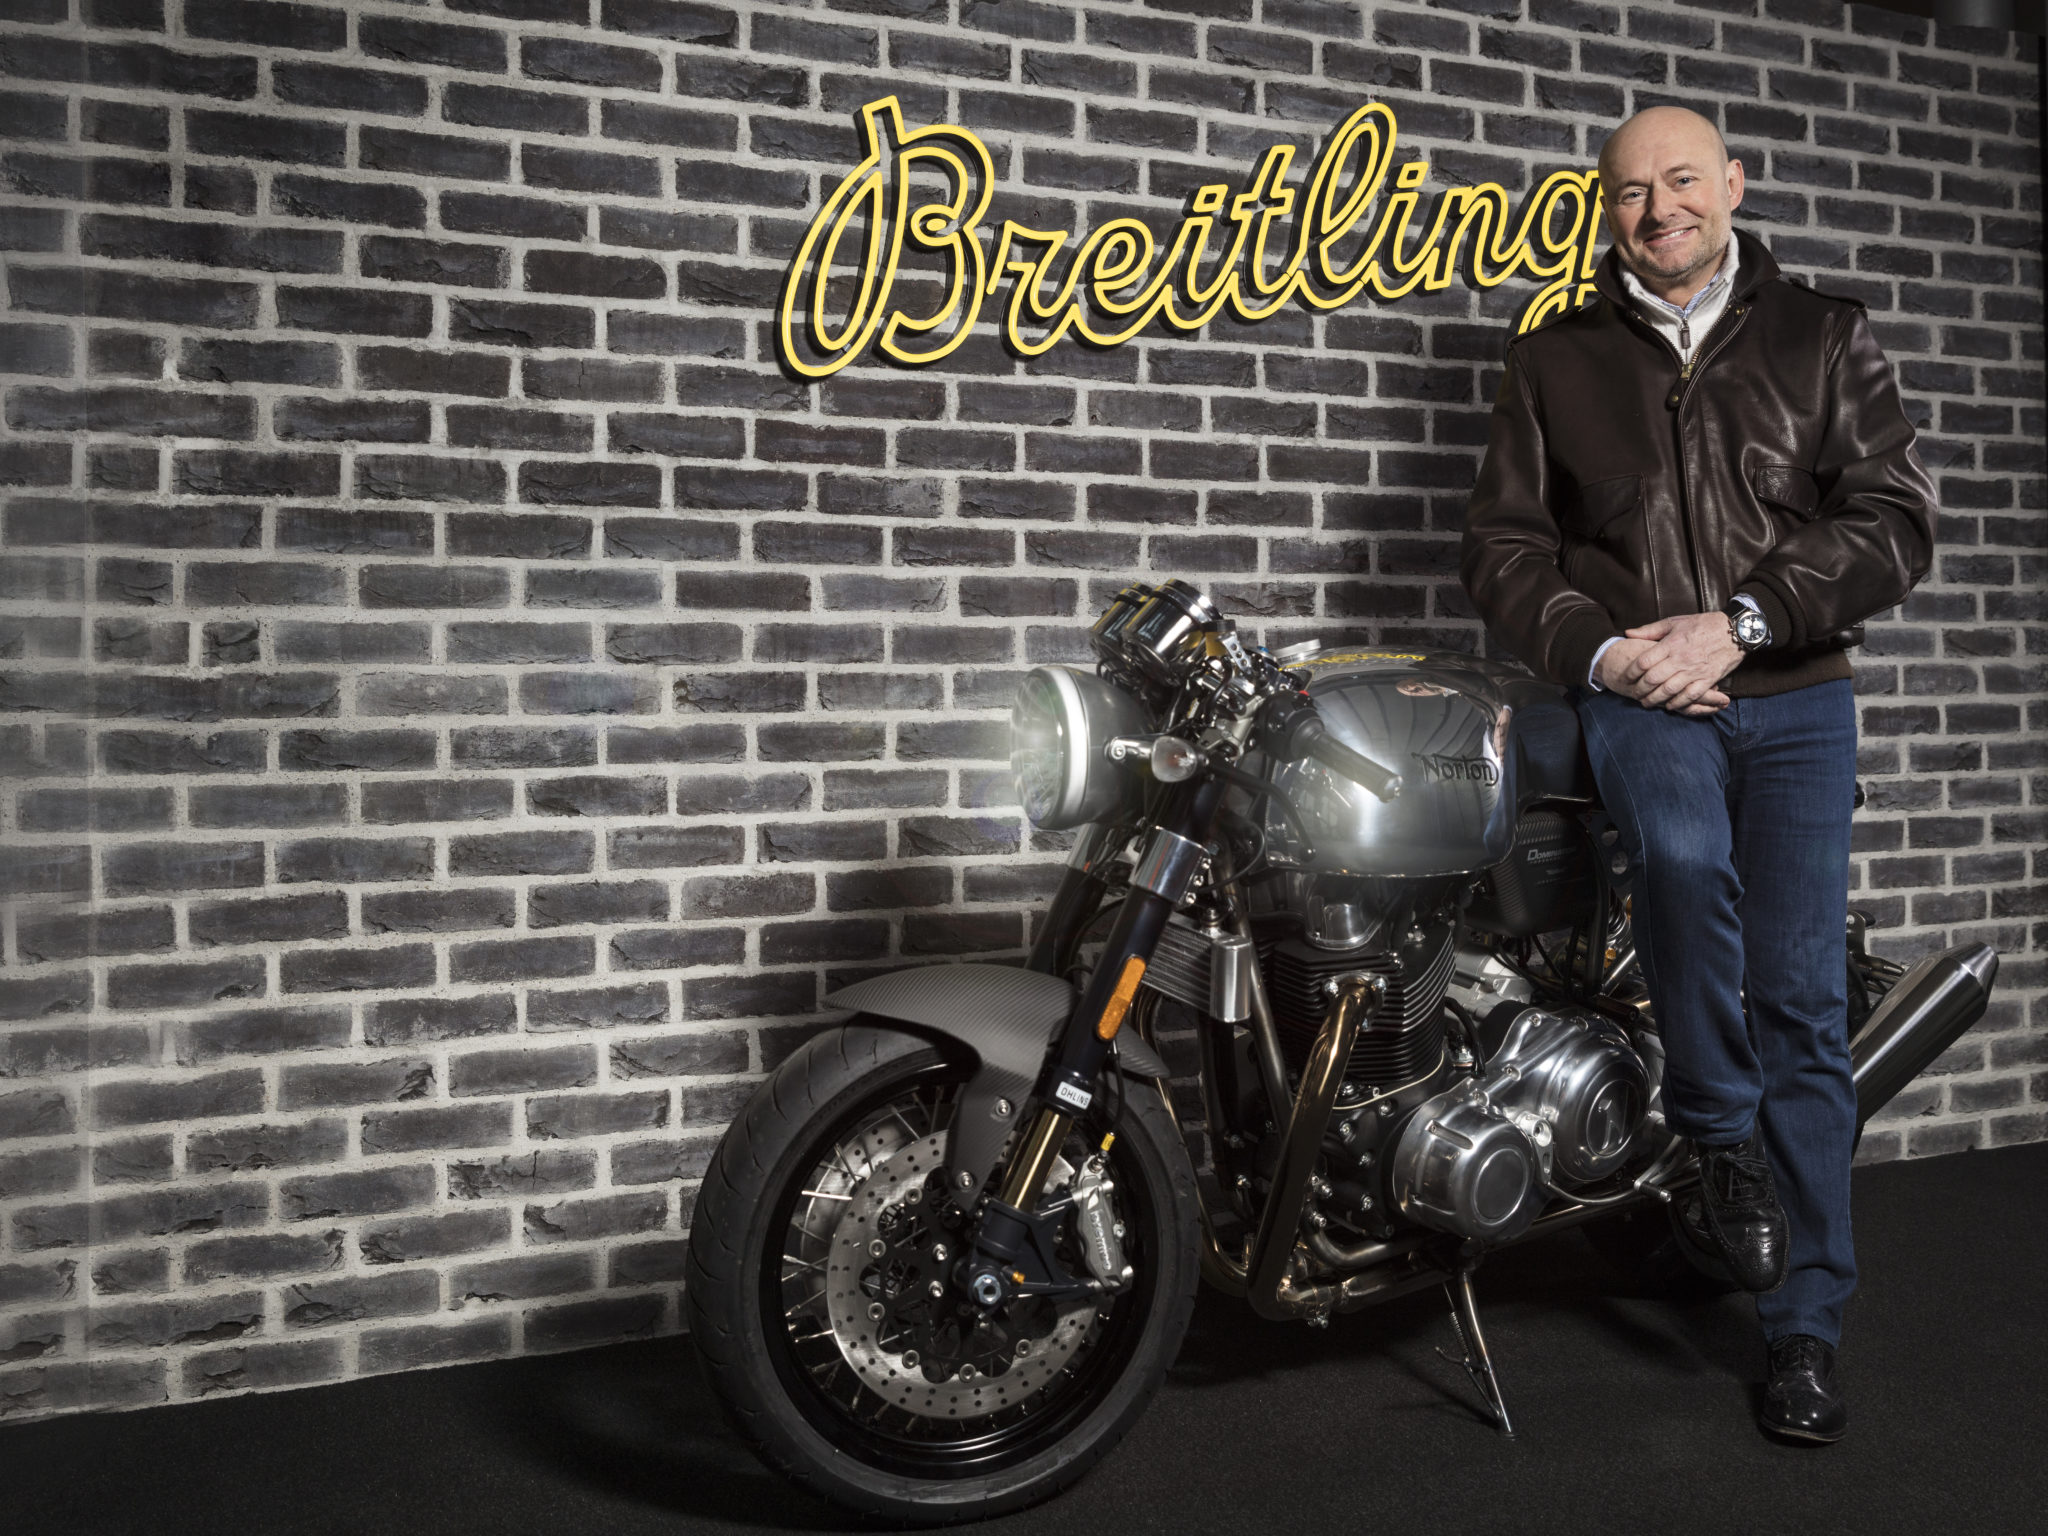 Breitling ceo mr georges kern and a norton commando motorcycle